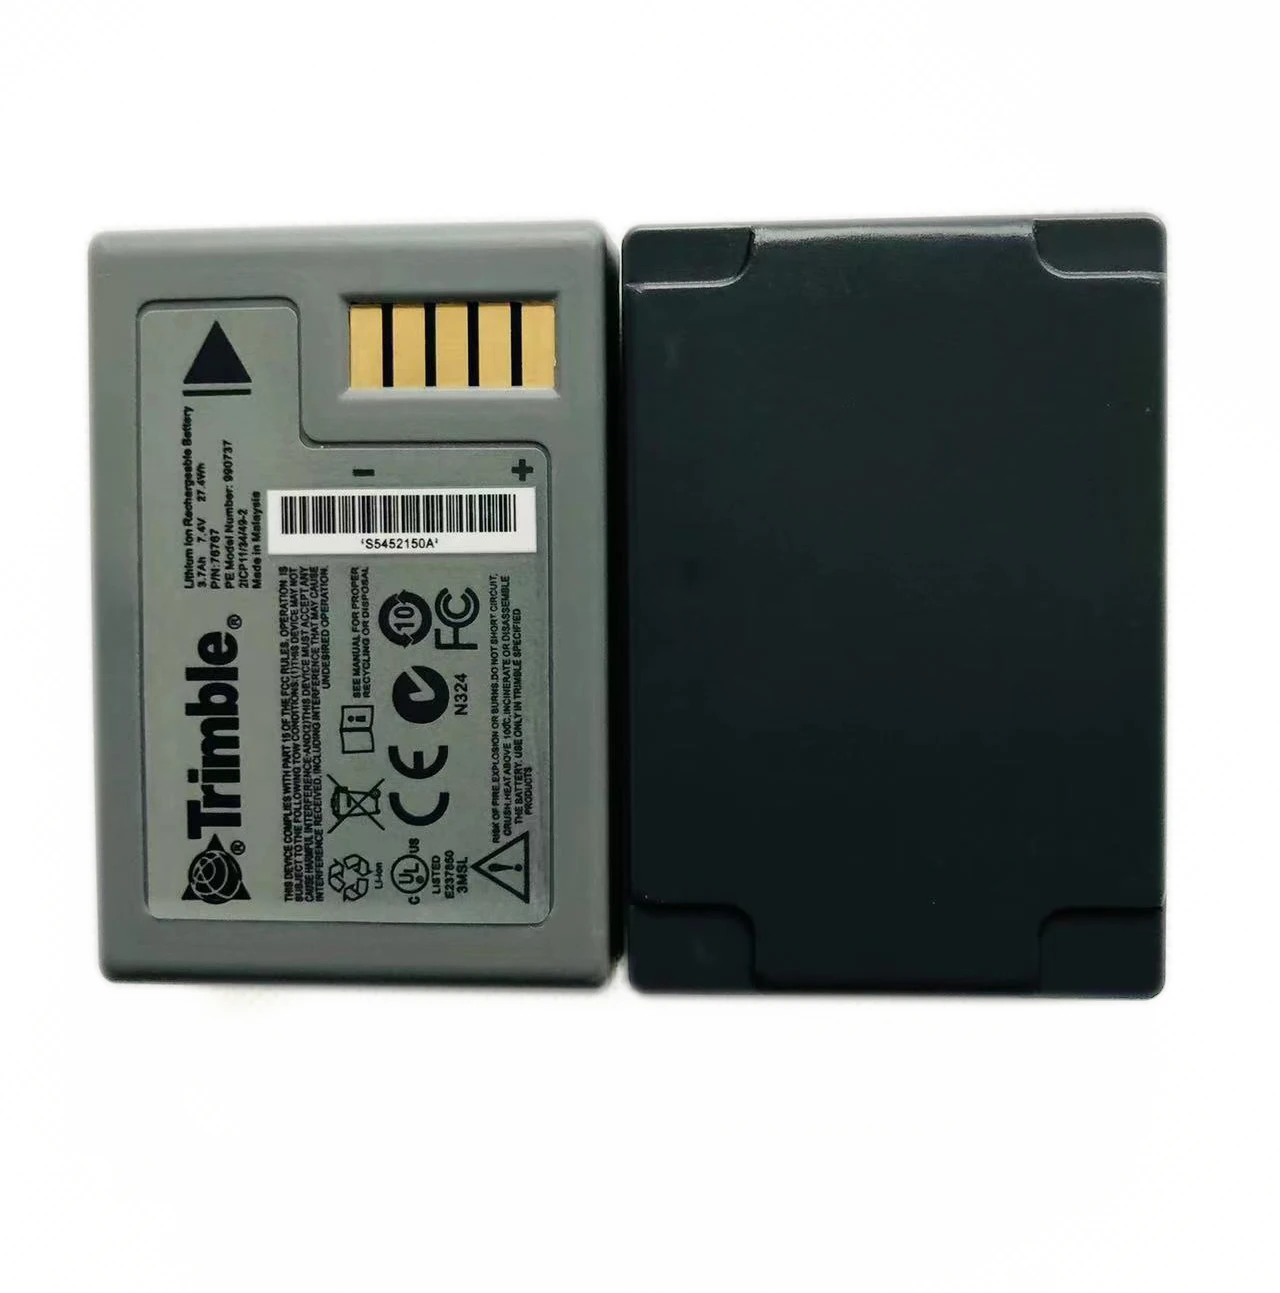 Brand New Replacement R10 Battery for Trimble R10 GPS RTK Receiver Battery 7.4V 3700mah li-ion Battery 18650.00